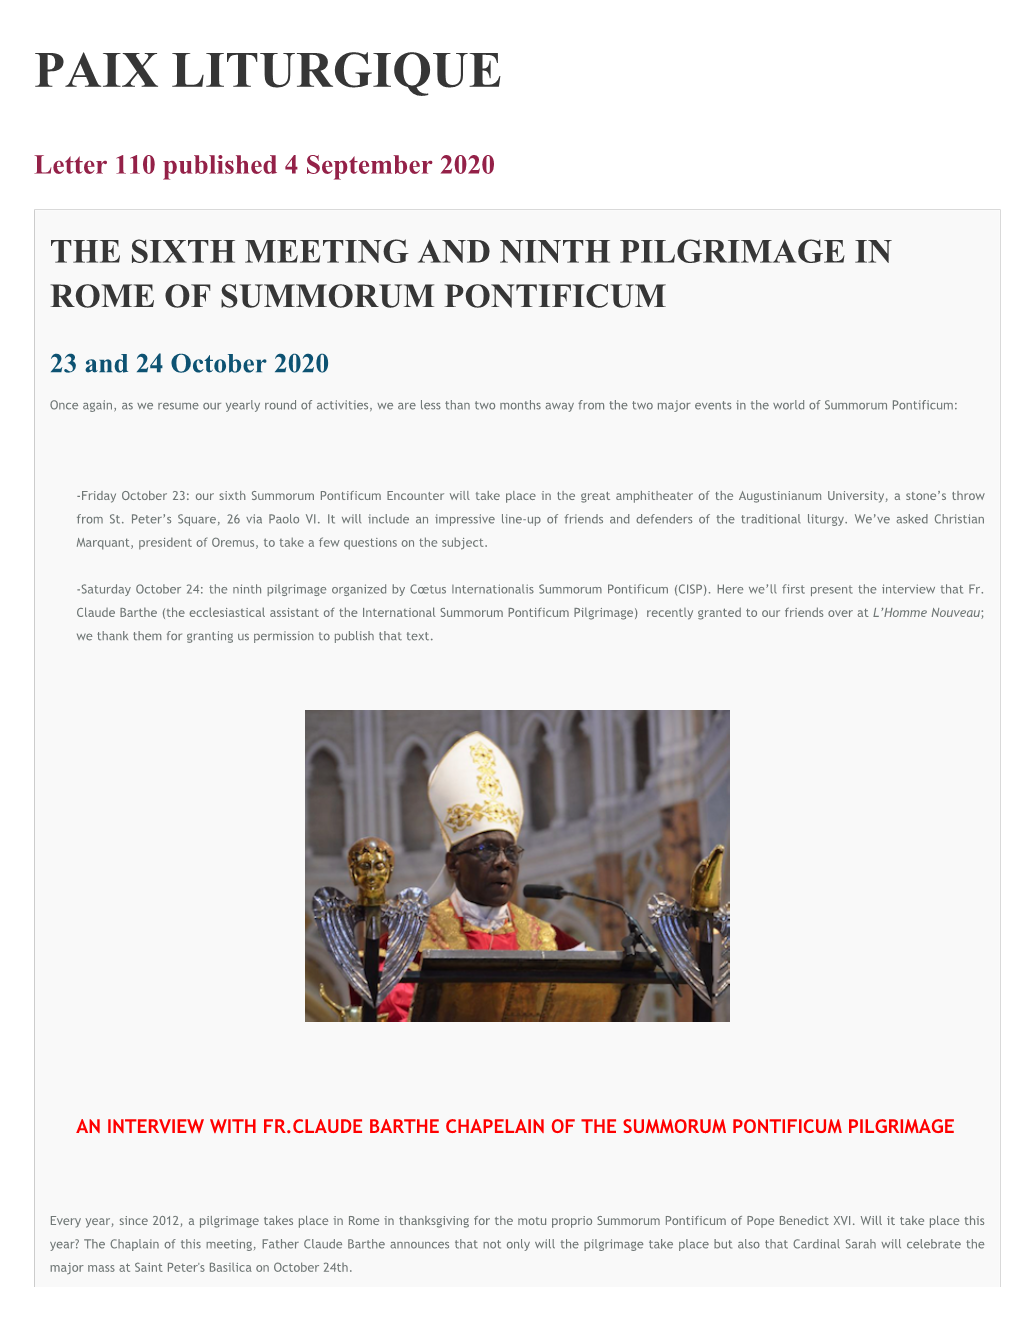 PAIX LITURGIQUE Letter 110 Published 4 September 2020 the SIXTH MEETING AND